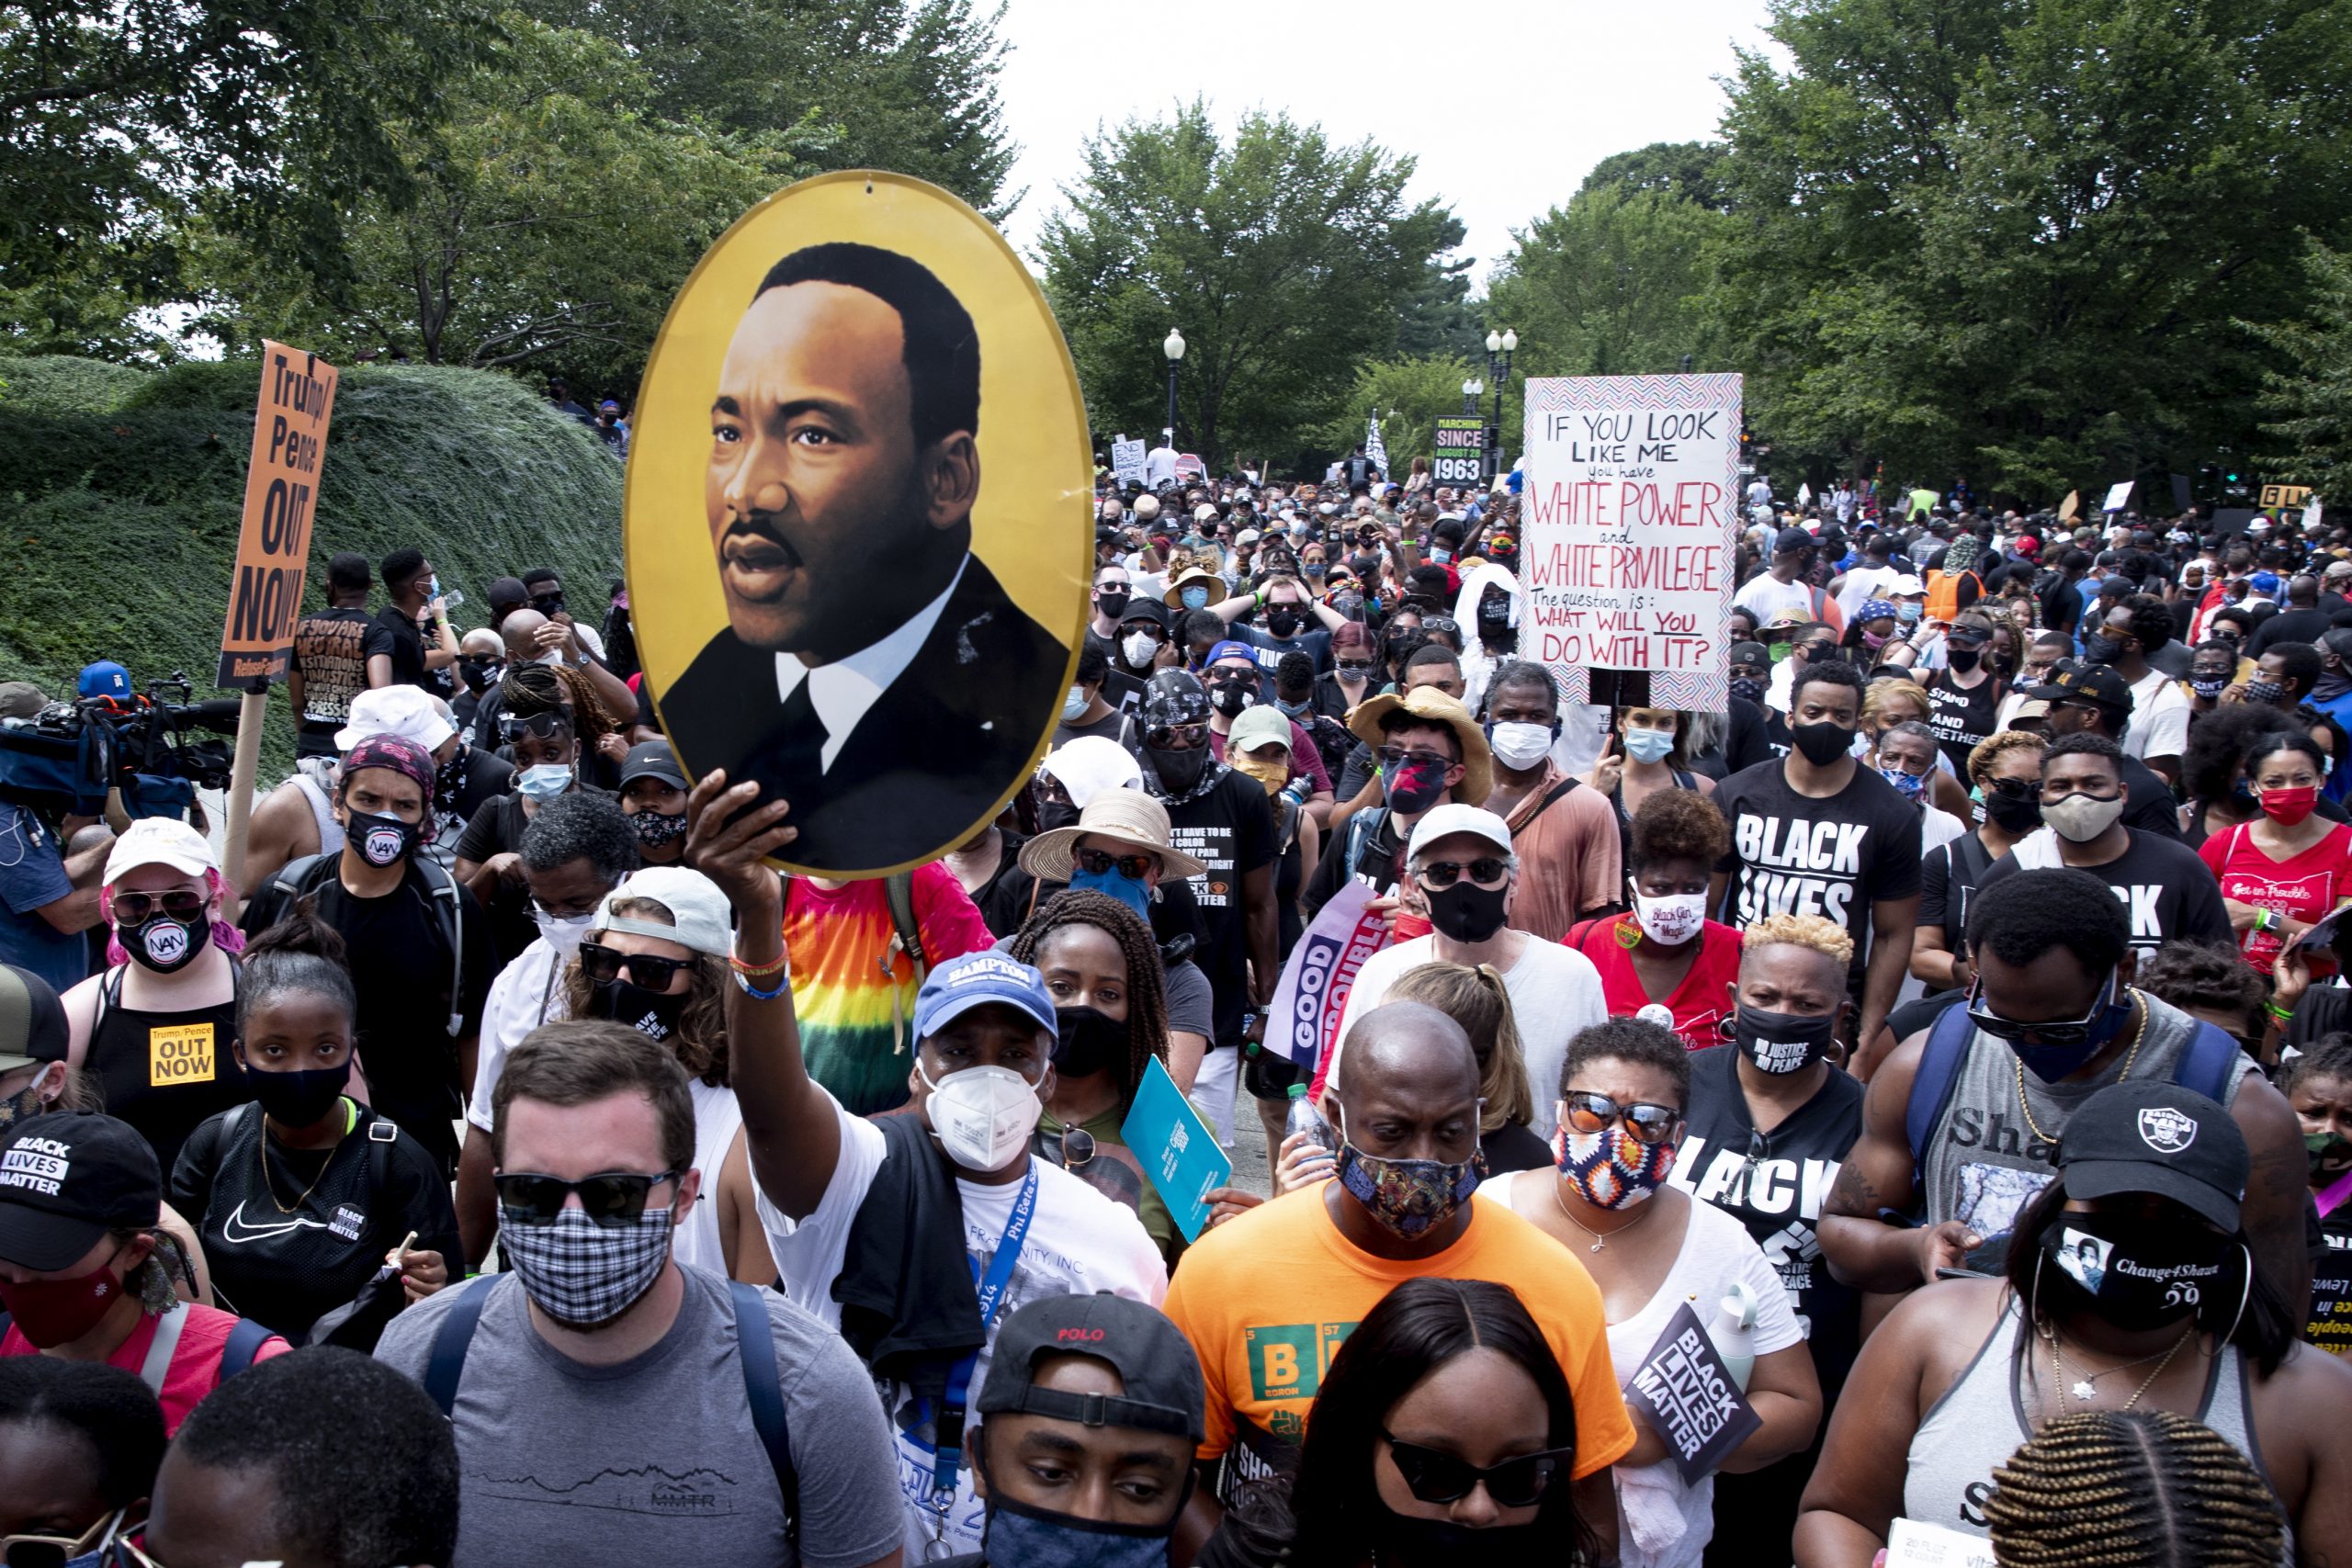 epa08632791 The image of Martin Luther King Jr. is seen among the crowd marching from the Lincoln Memorial to the Martin Luther King Jr. Memorial during the 'Commitment March: Get Your Knee Off Our Necks', in Washington, DC, USA, 28 August 2020. The March on Washington comes on the 57th anniversary of Dr. Martin Luther King's historic march, when he delivered his 'I Have a Dream' speech.  EPA/MICHAEL REYNOLDS